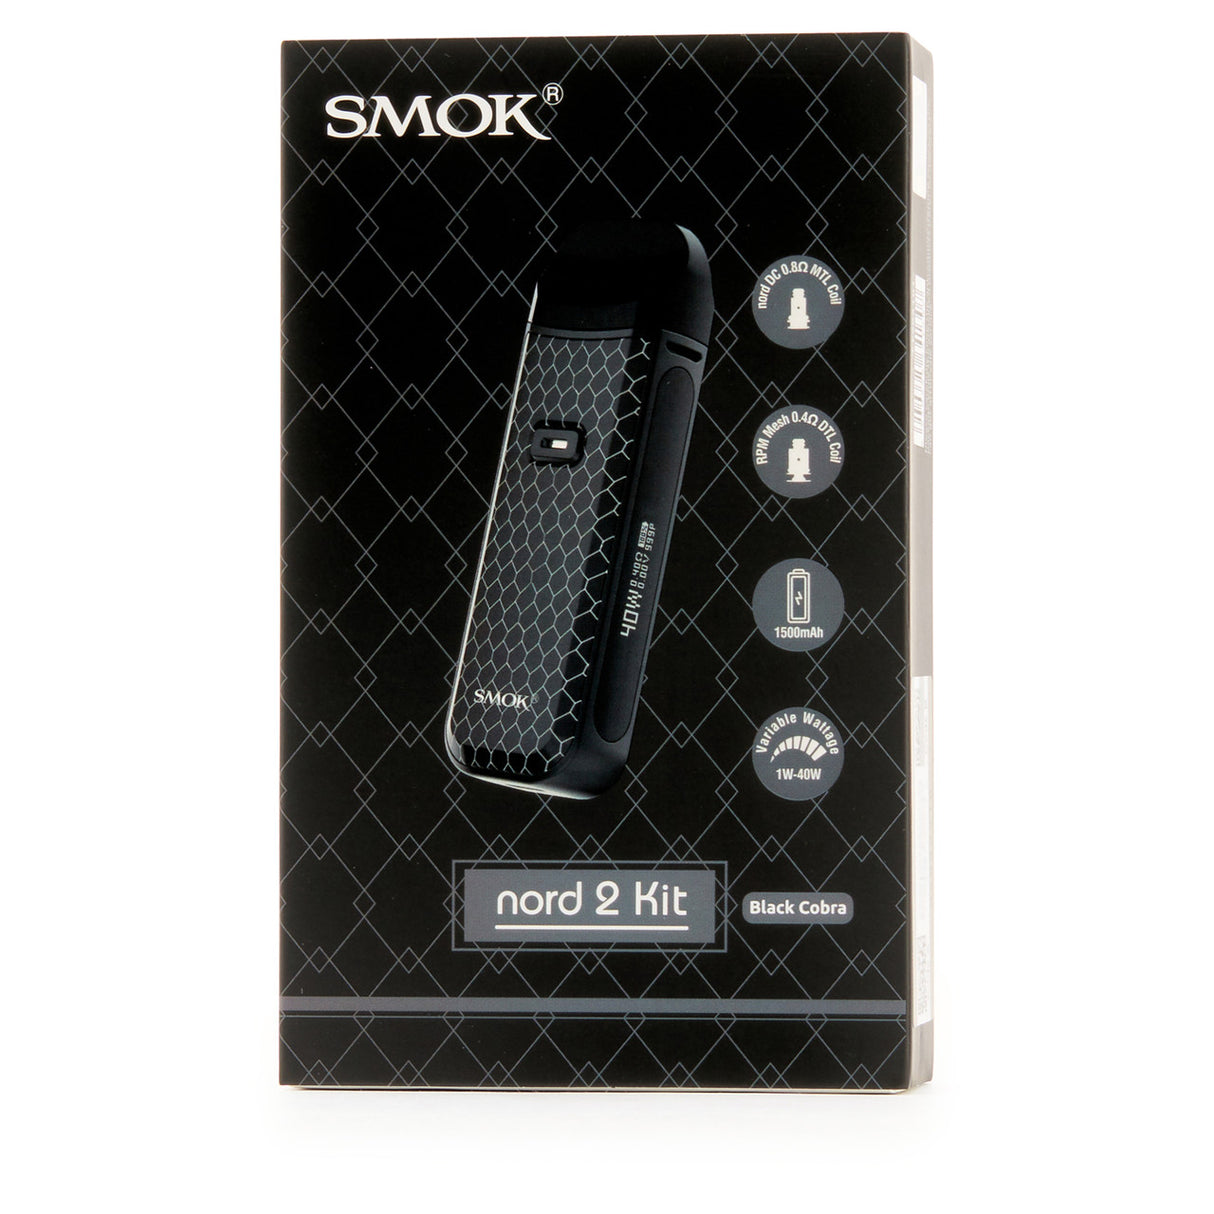 SMOK Nord 2 Vape Kit is perfect for vaping beginners. Get yours today for under $50 2